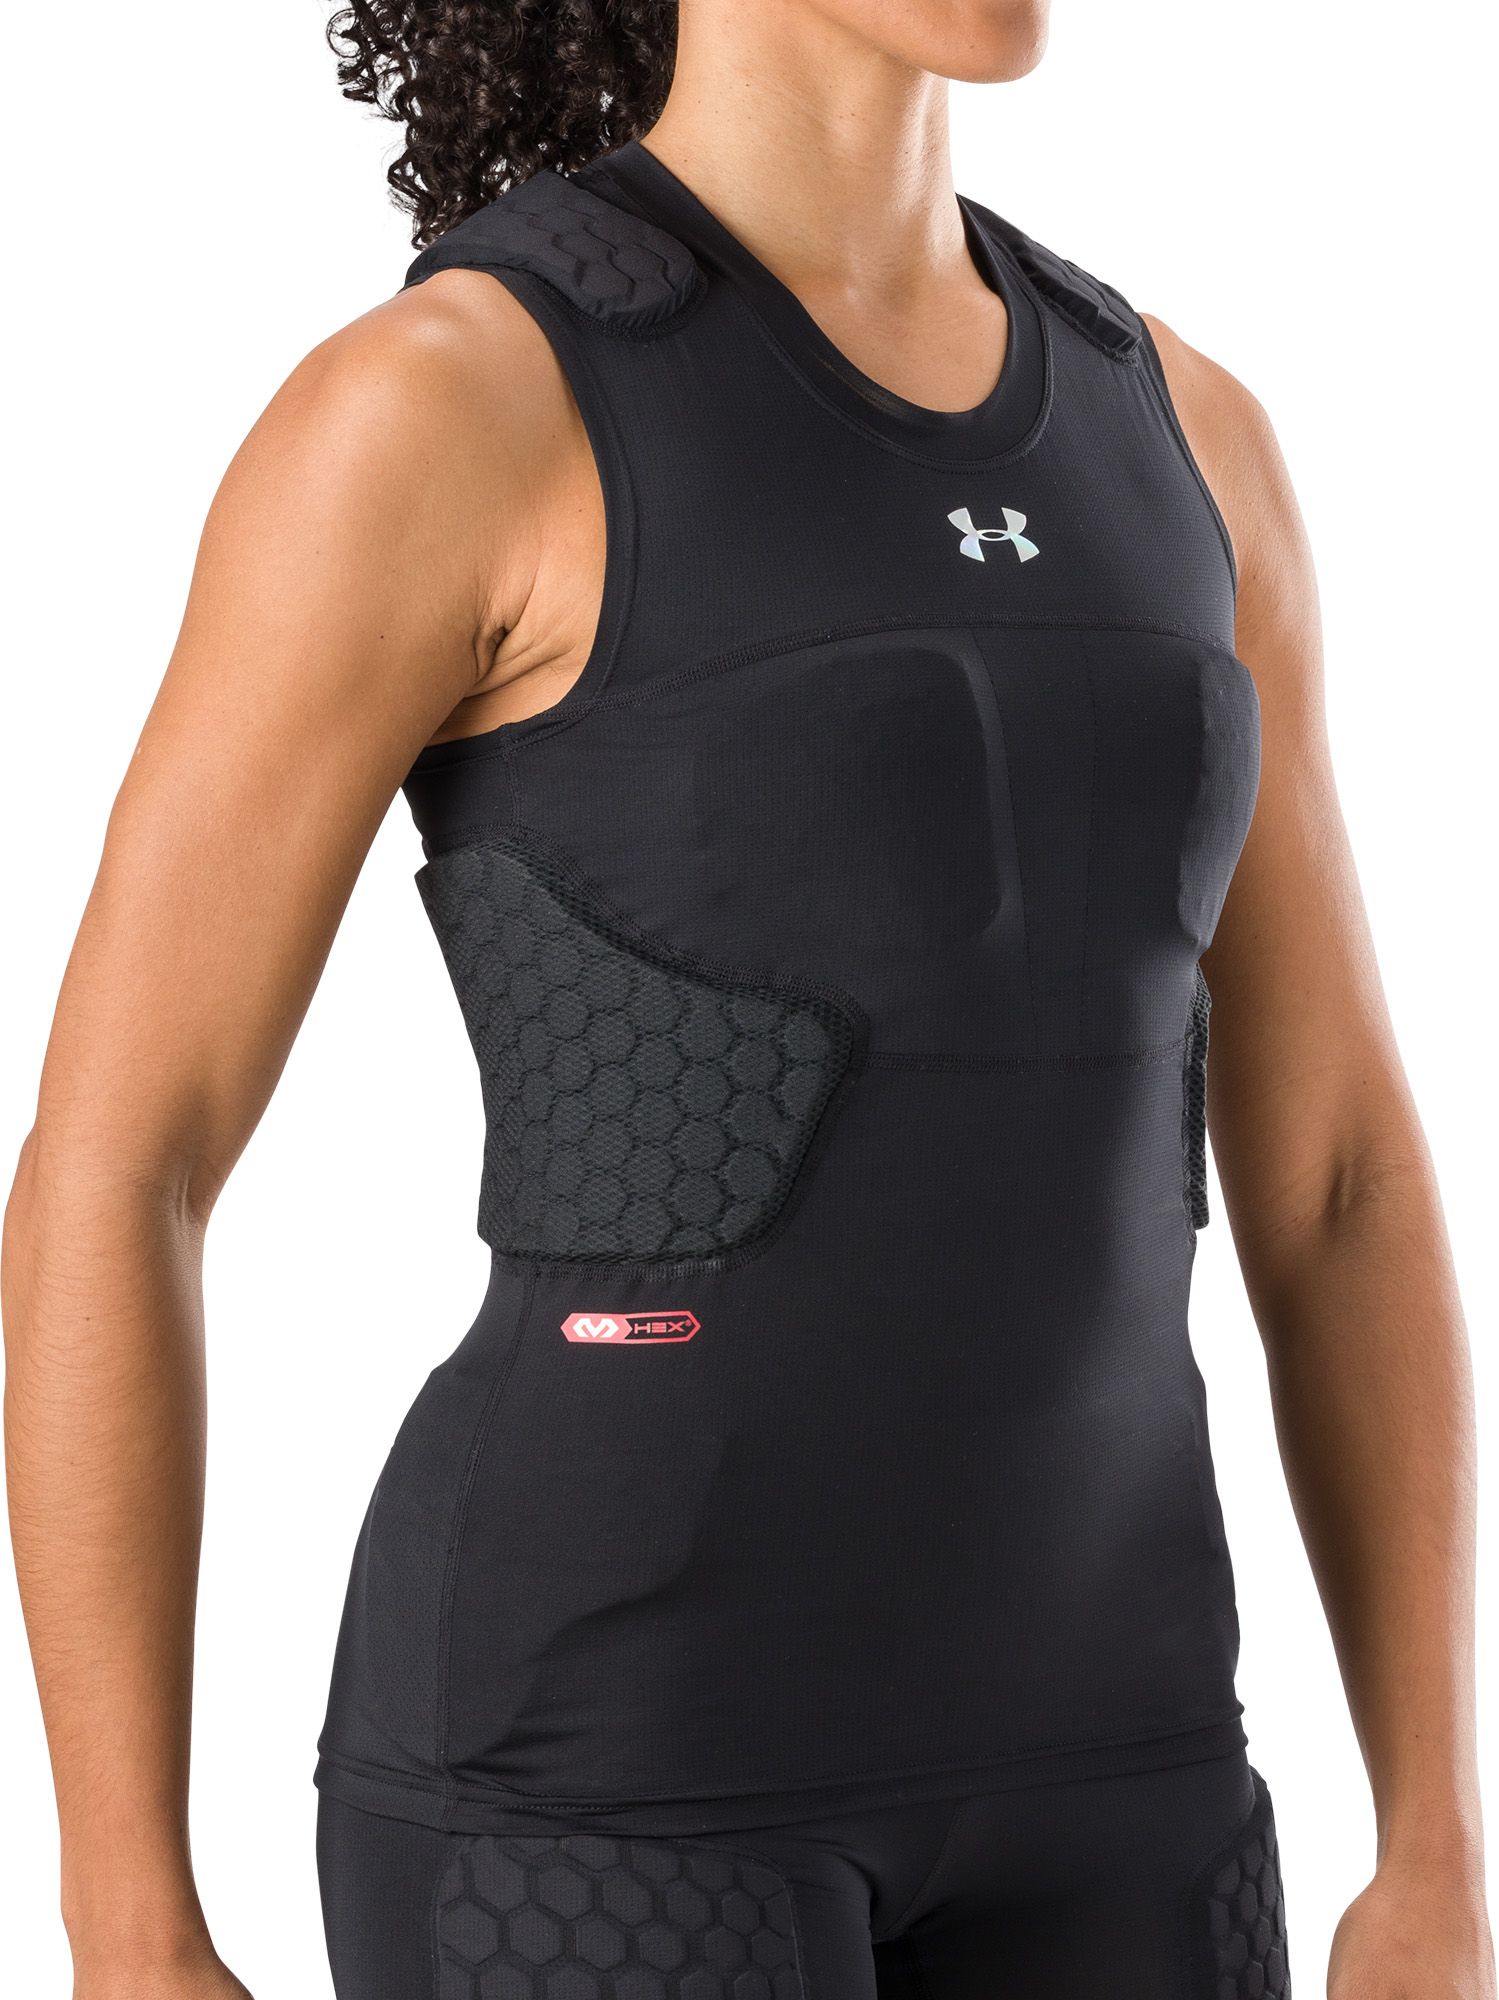 Under Armour Womens 7-Pad Football Top